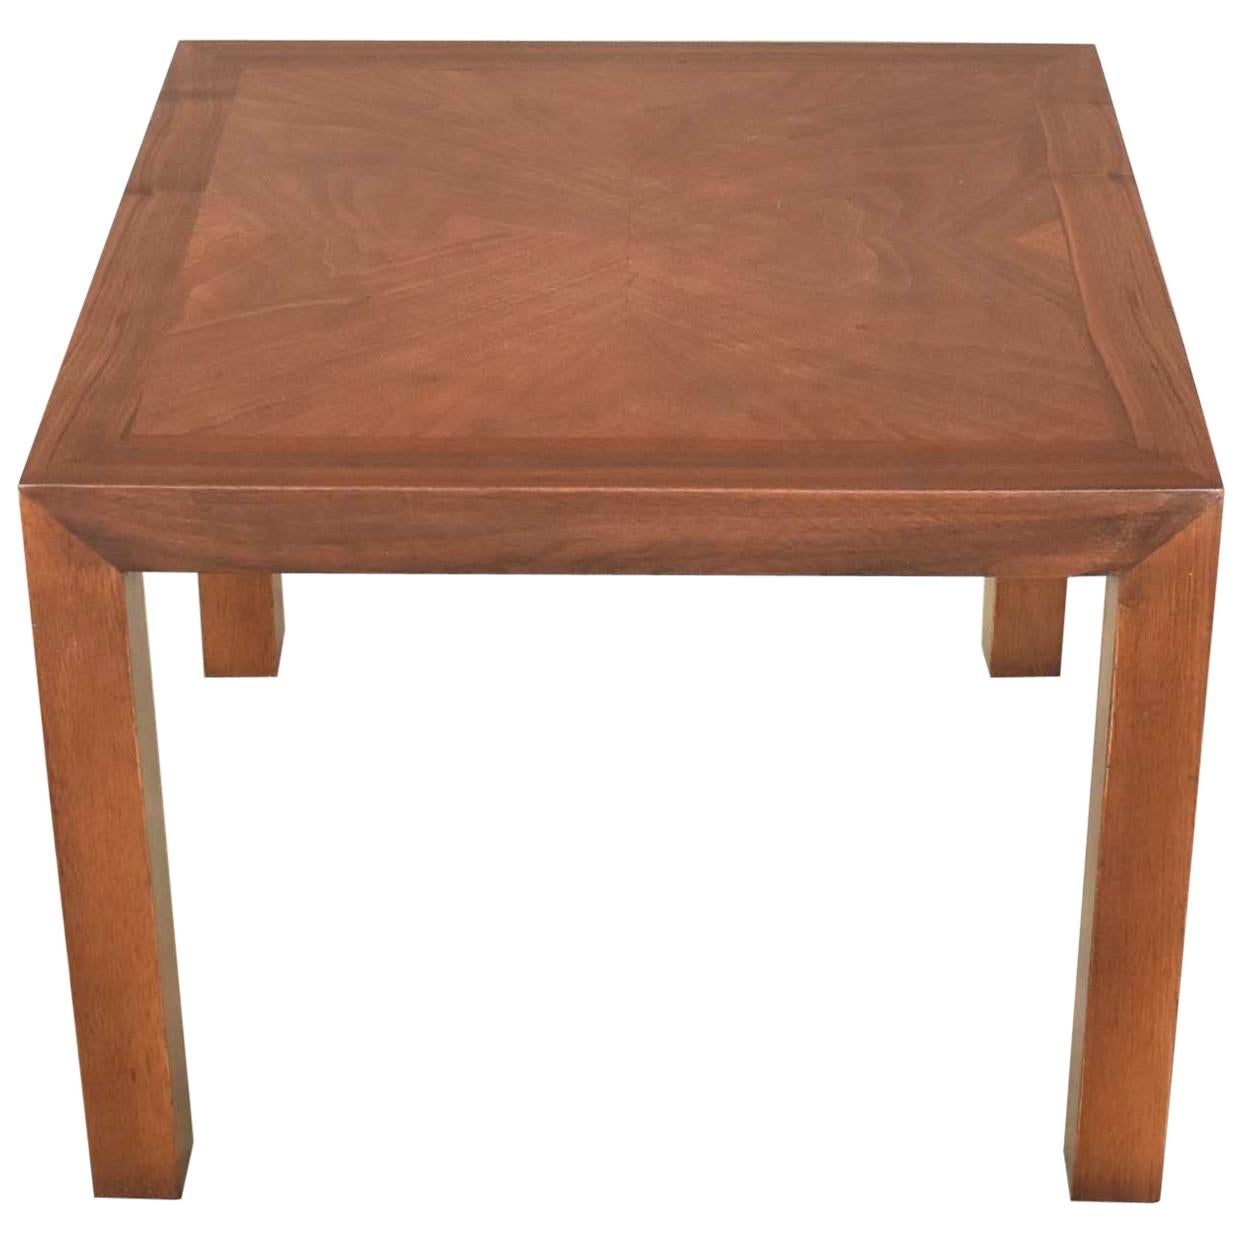 Vintage Modern Lane Solid Walnut Square Parsons Side Table Style #1124-18, 1970